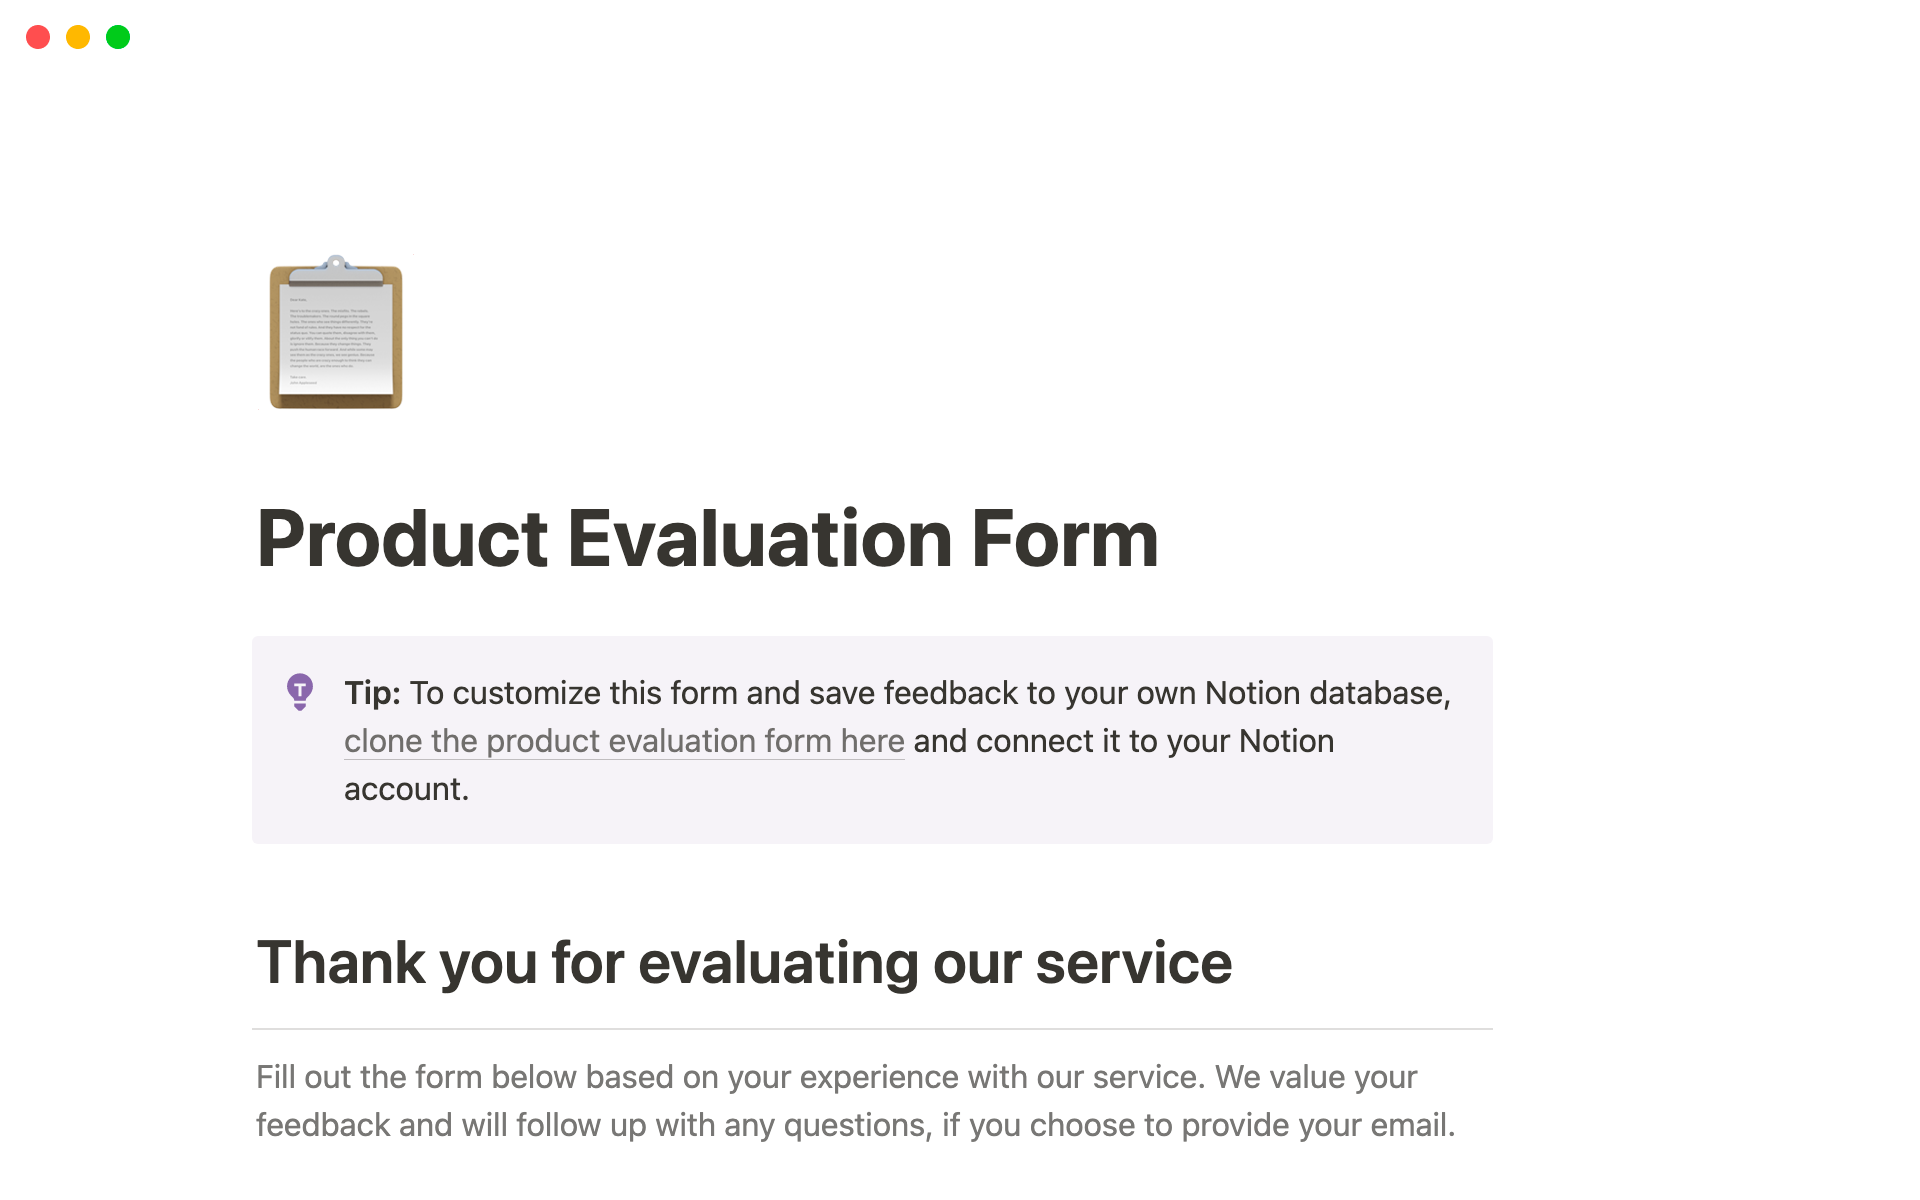 This product evaluation form template lets users provide feedback on a service, helping companies gather valuable insights and improve their offerings.